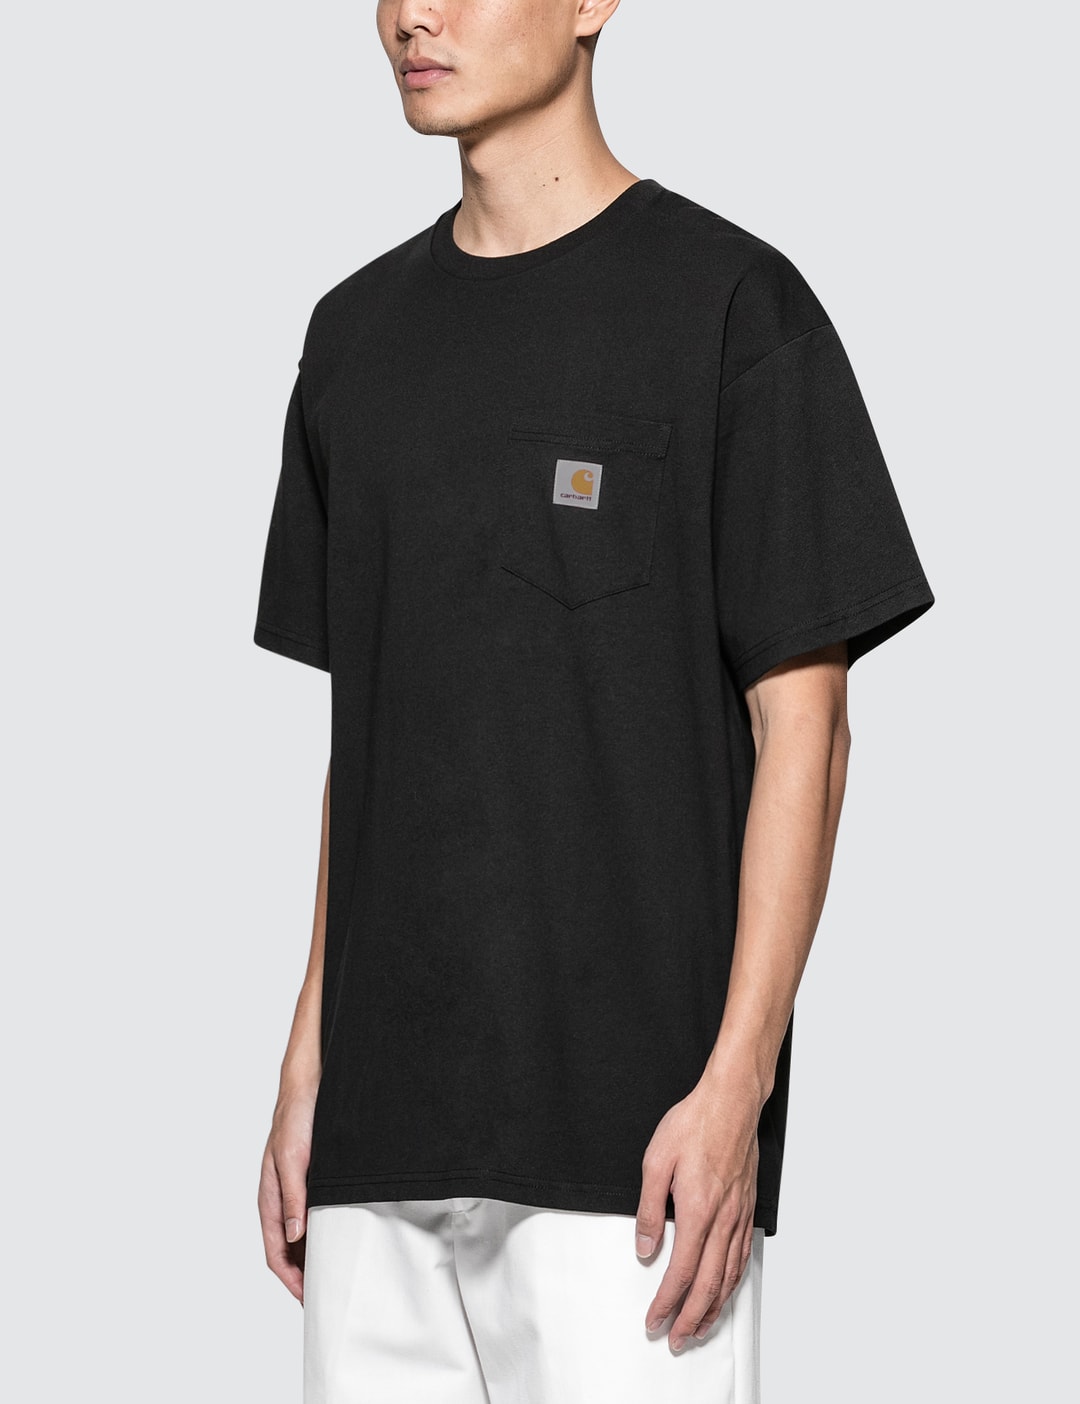 Carhartt In Progress - Loose Fit S/S Pocket T-Shirt HBX - Globally Curated Fashion and by Hypebeast